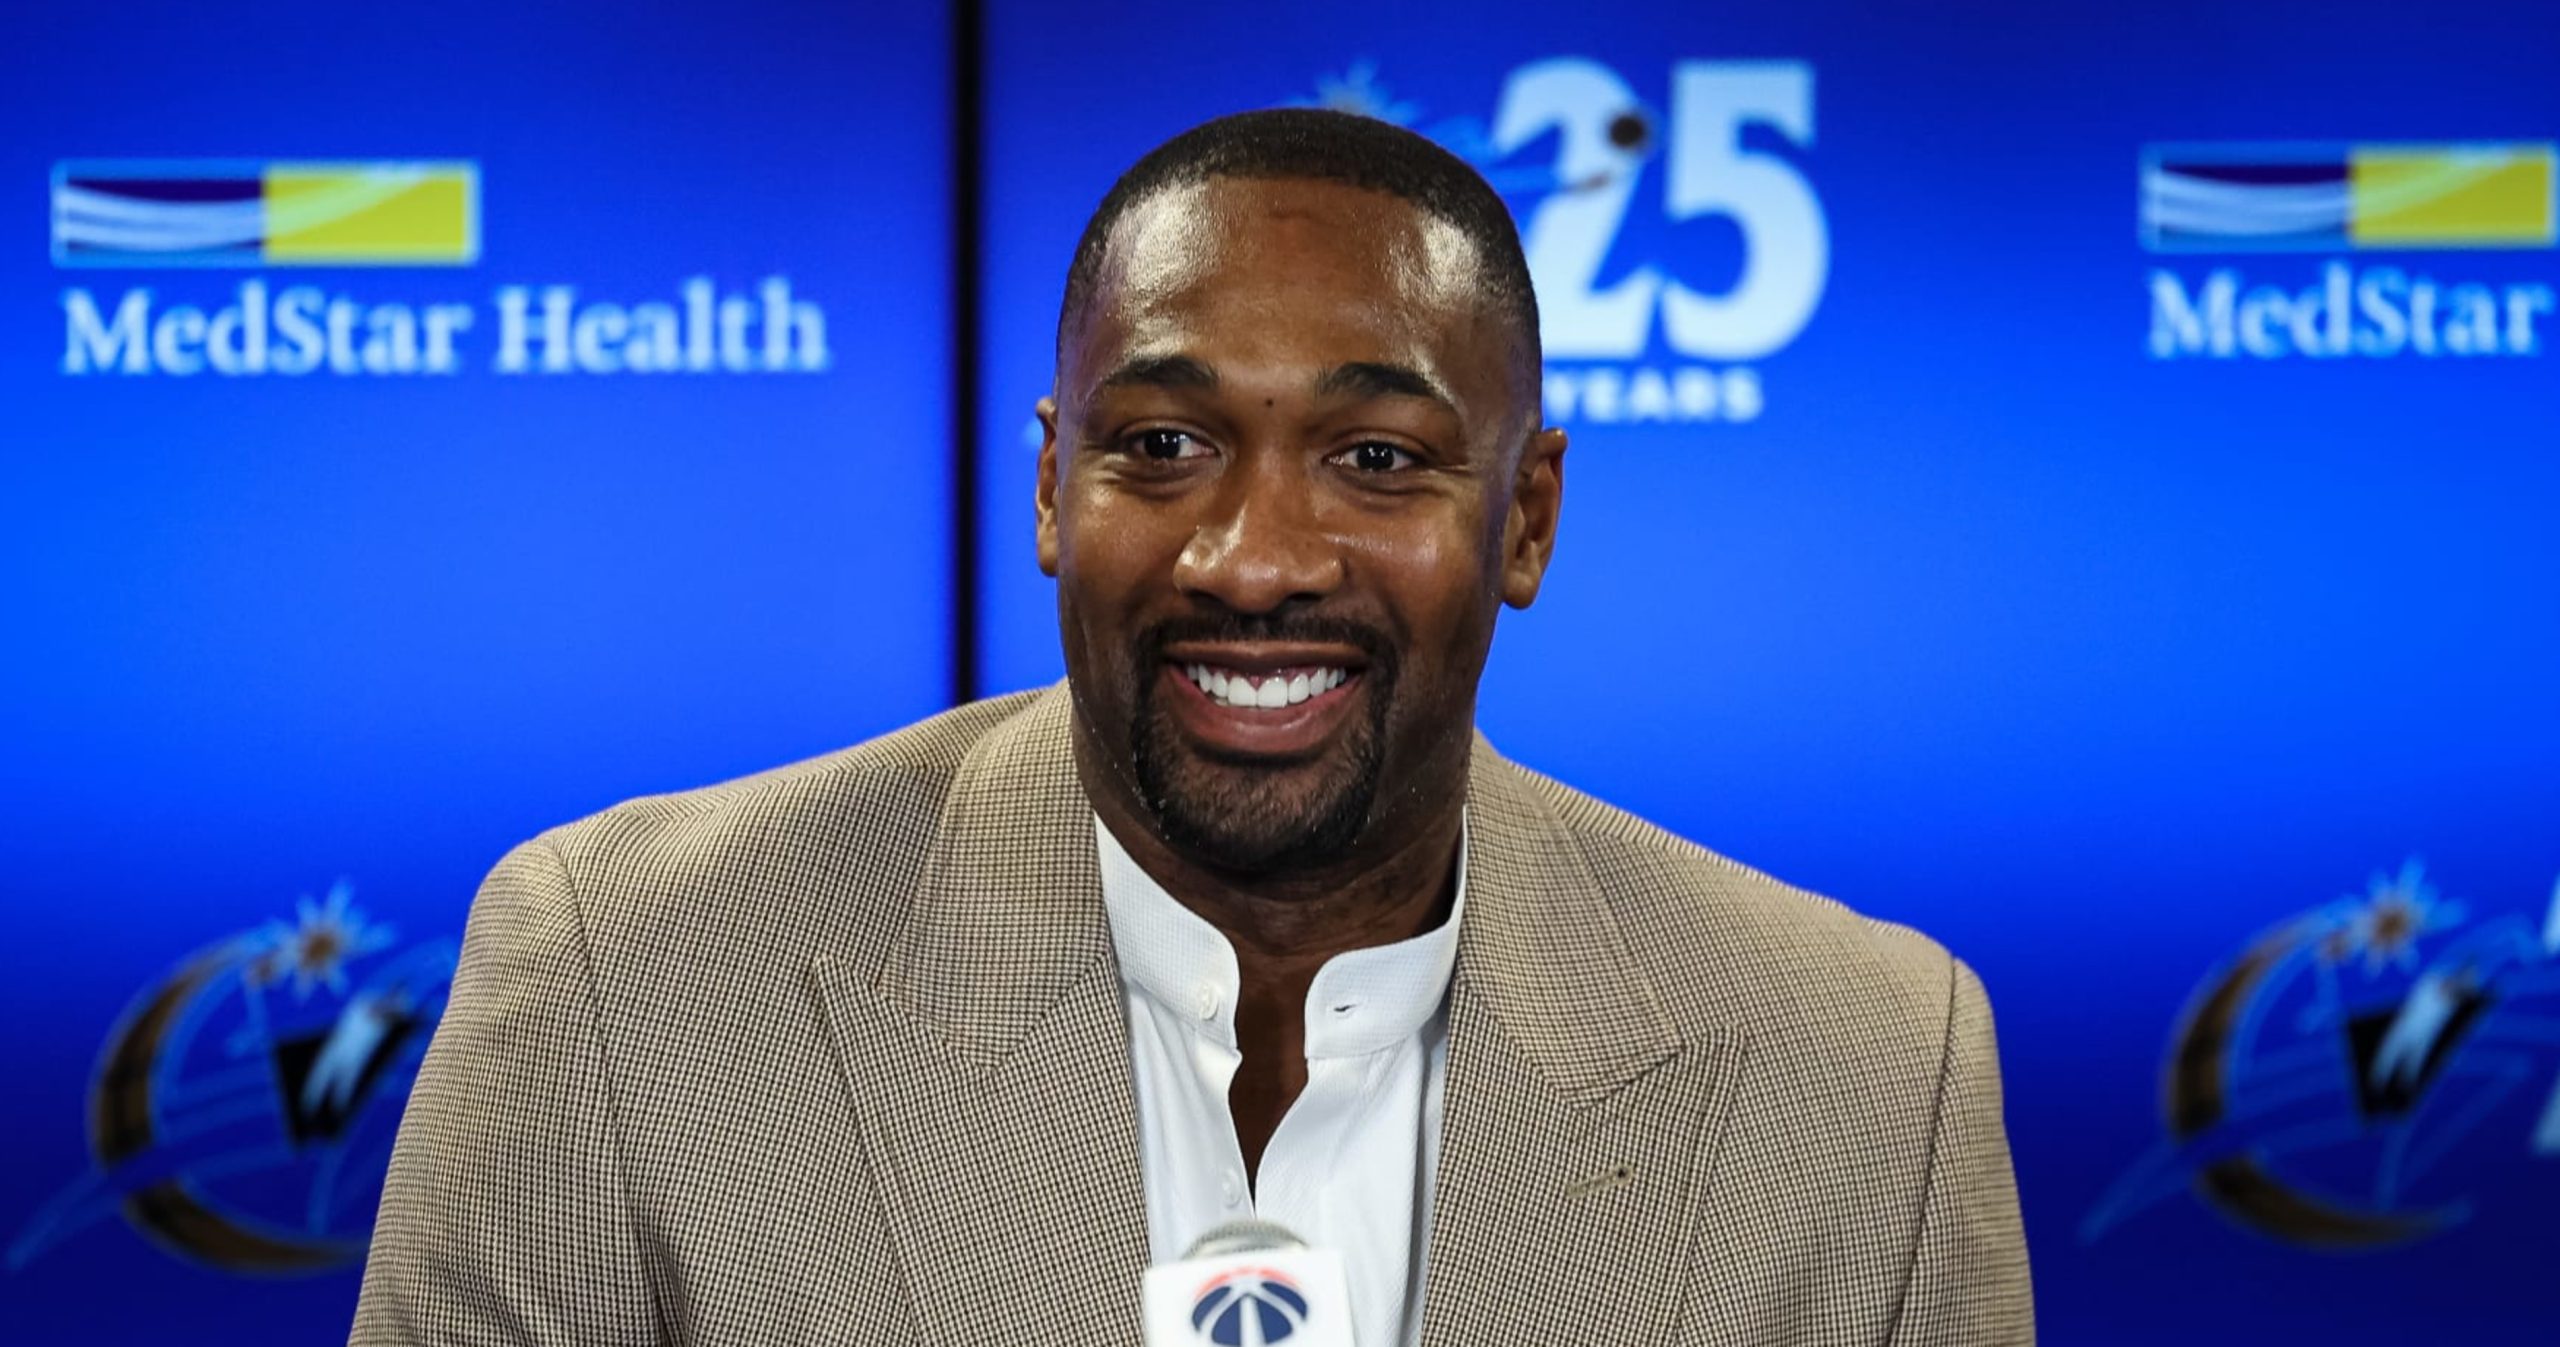 gilbert-arenas-on-white-american-basketball-players:-‘they-are-being-coddled’-|-video